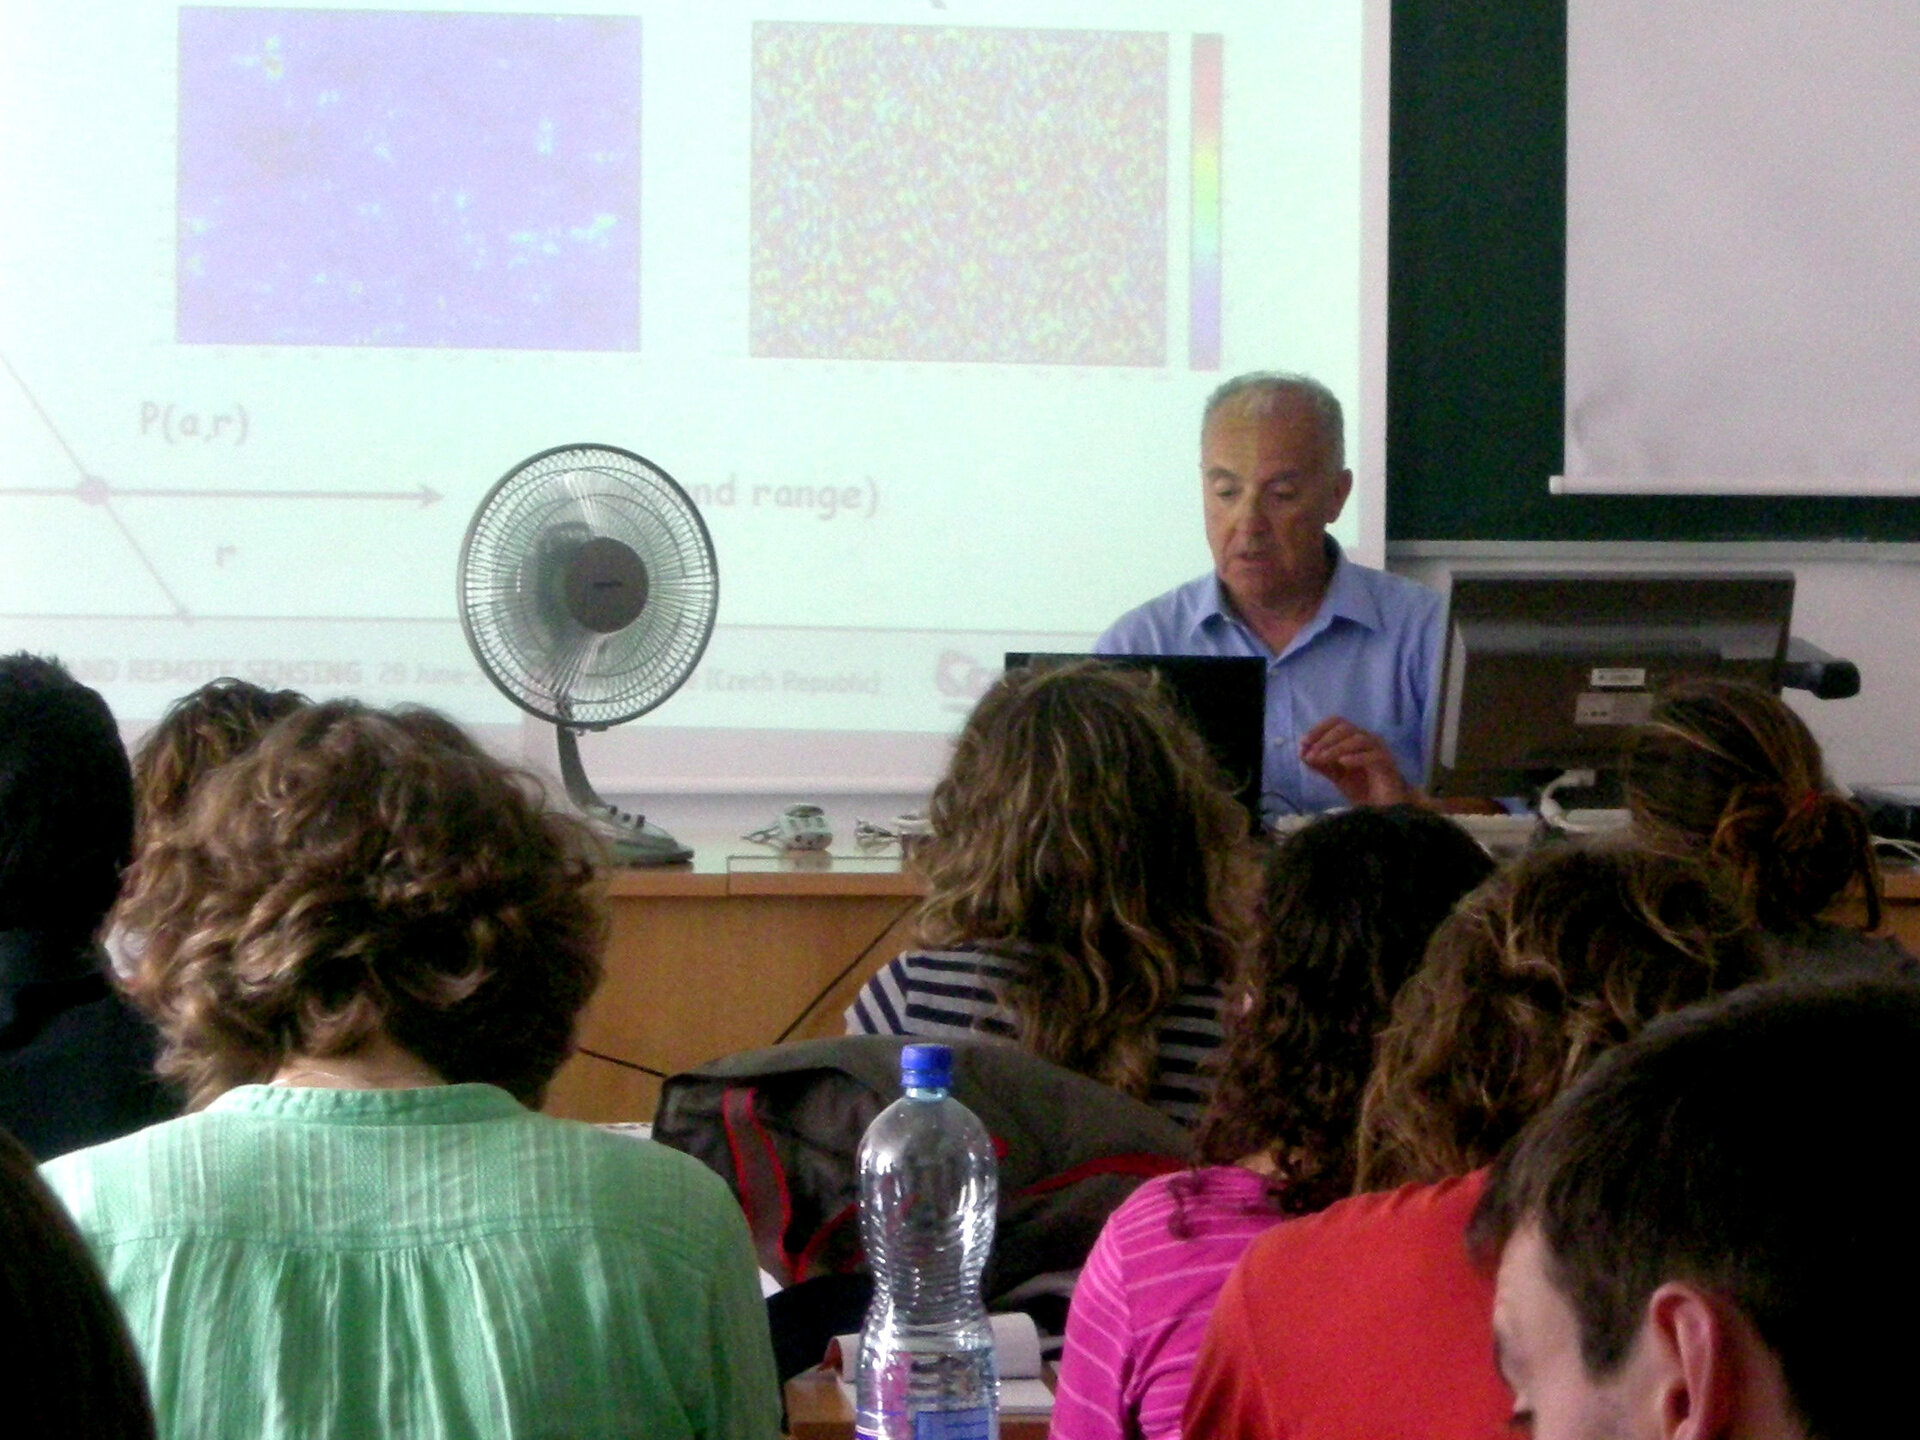 Prof. Rocca during a lecture